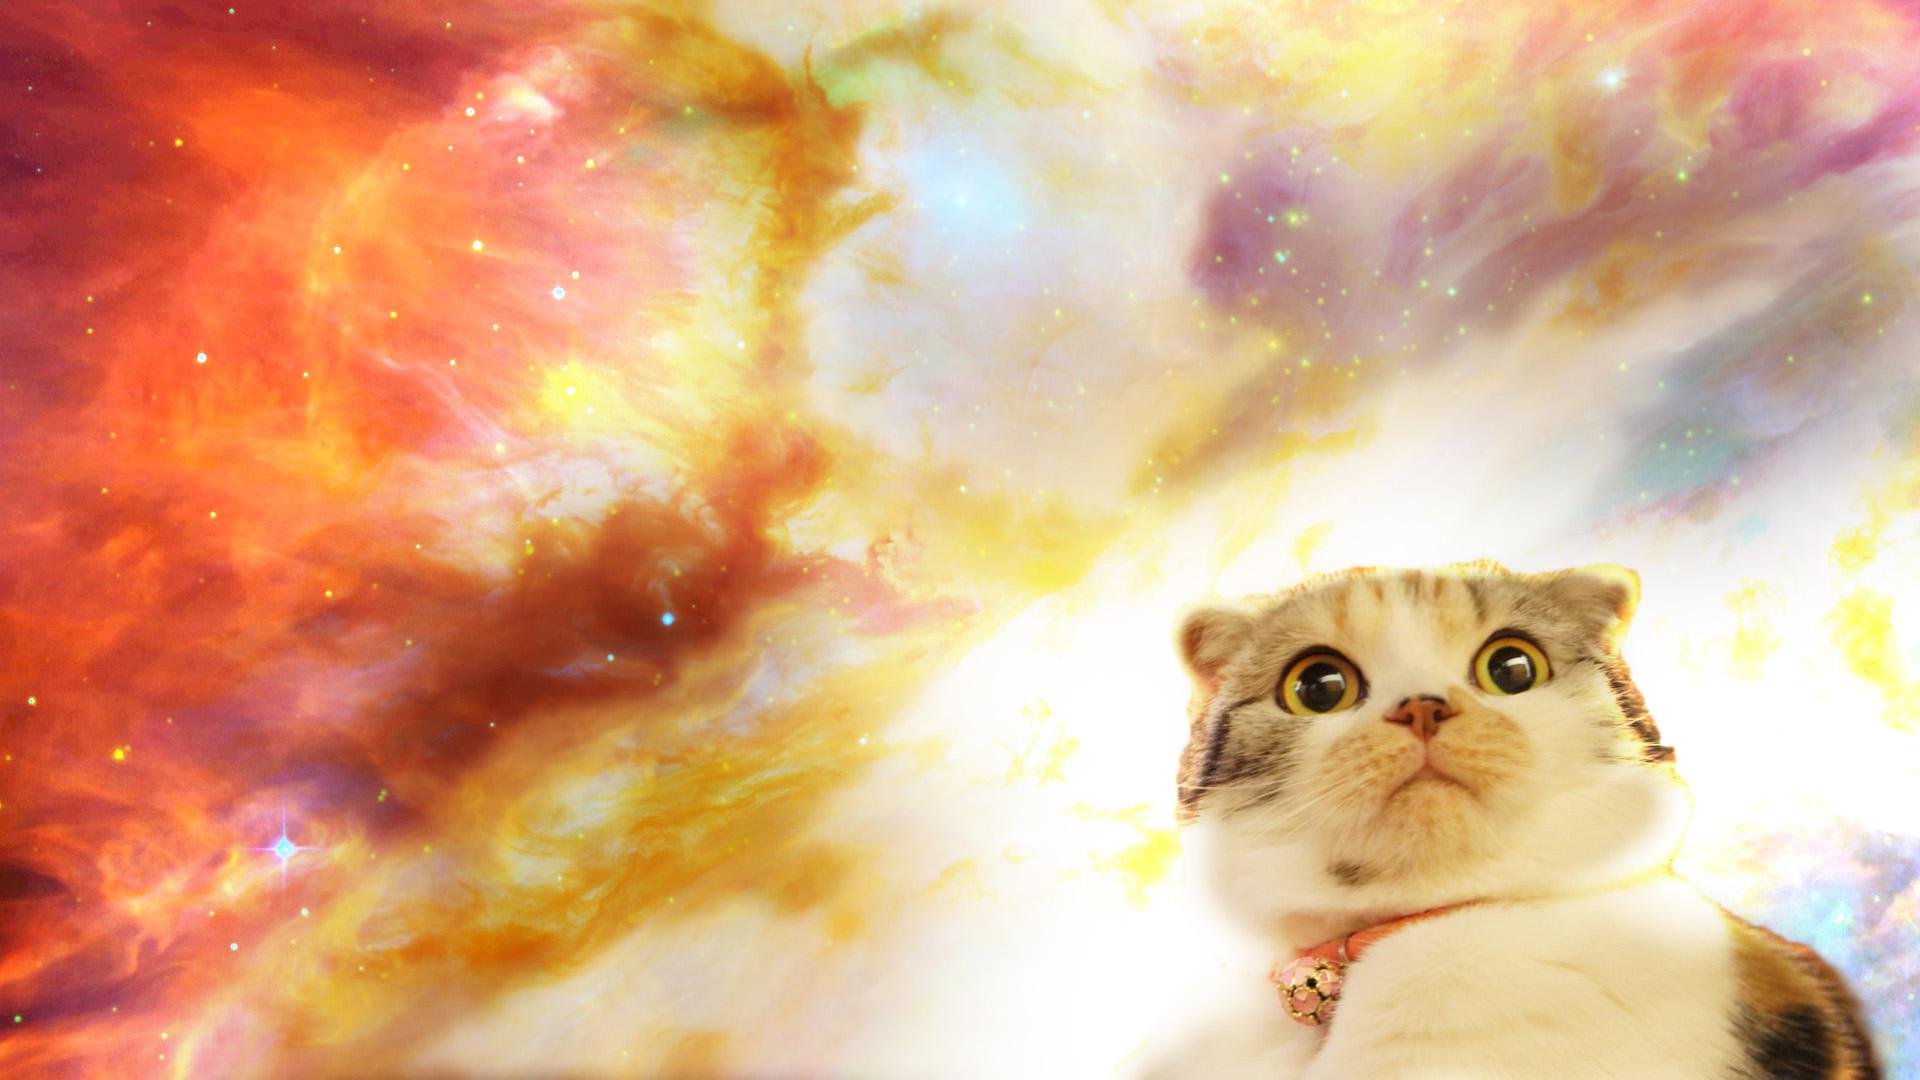 Space Laser Cat Wallpapers Hd With Glasses Awesome - Cat In Space Background - HD Wallpaper 